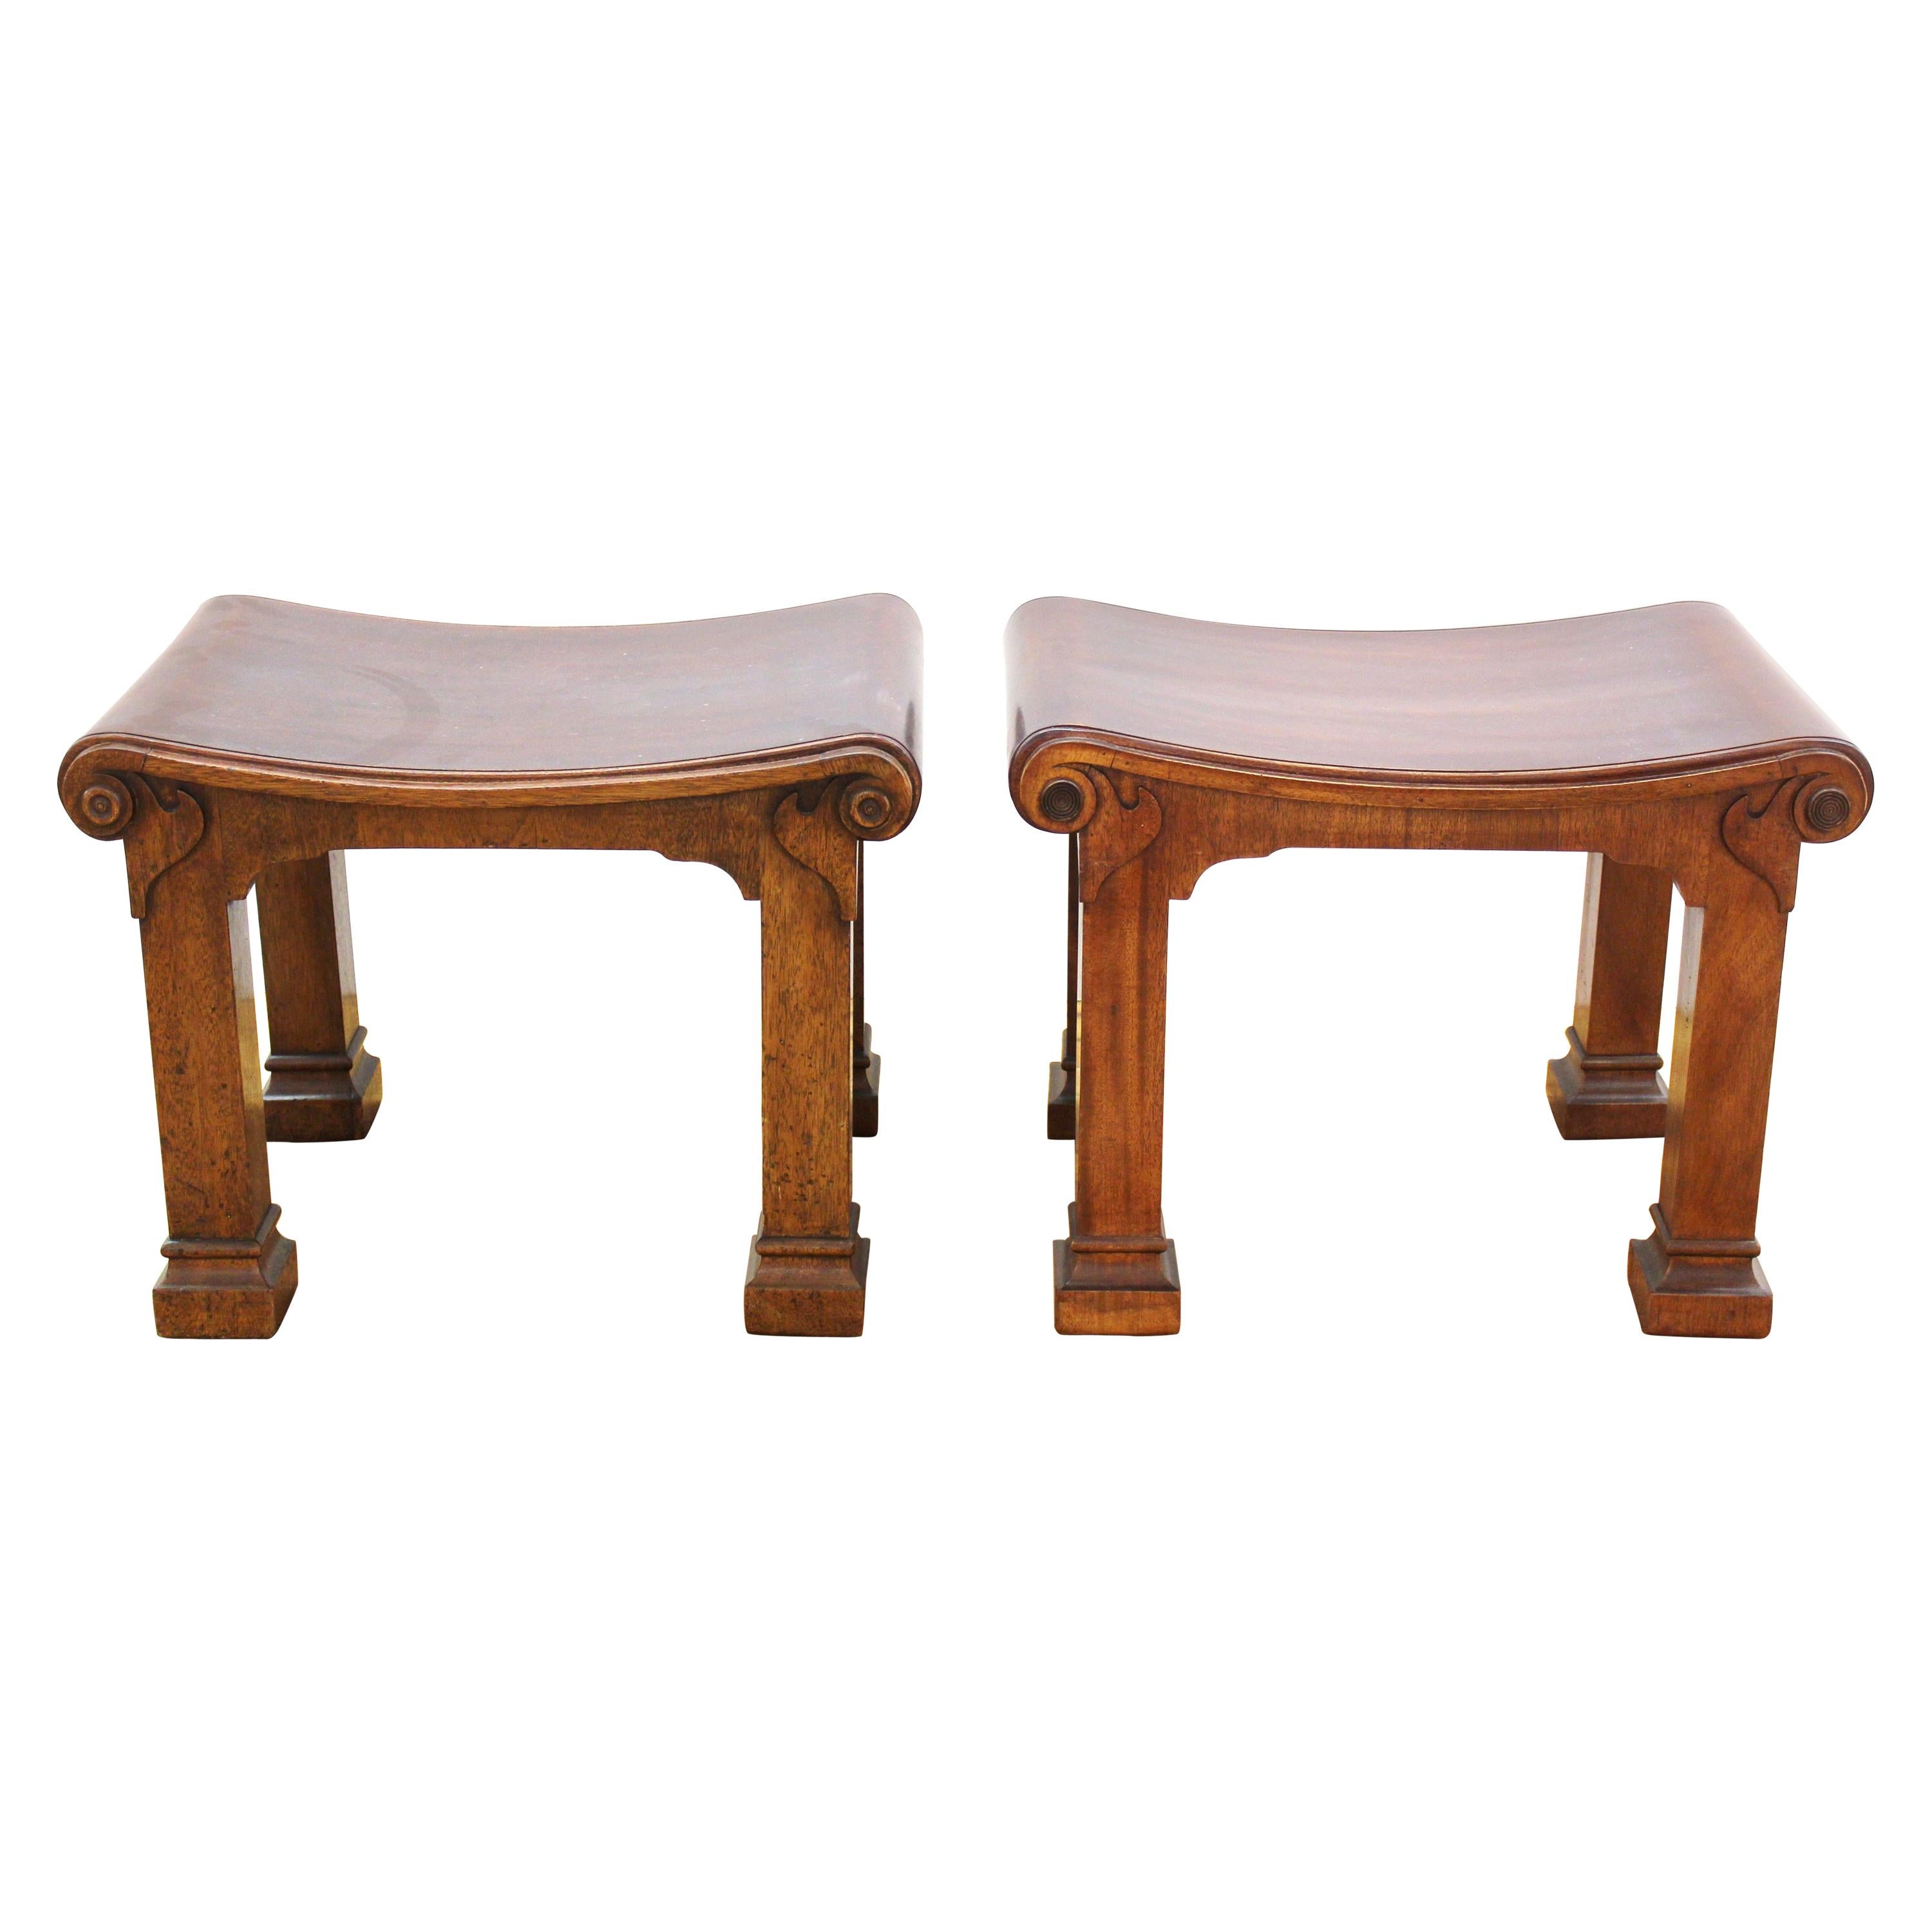 Robsjohn Gibbings Attributed Neoclassical Style Carved Wood Benches